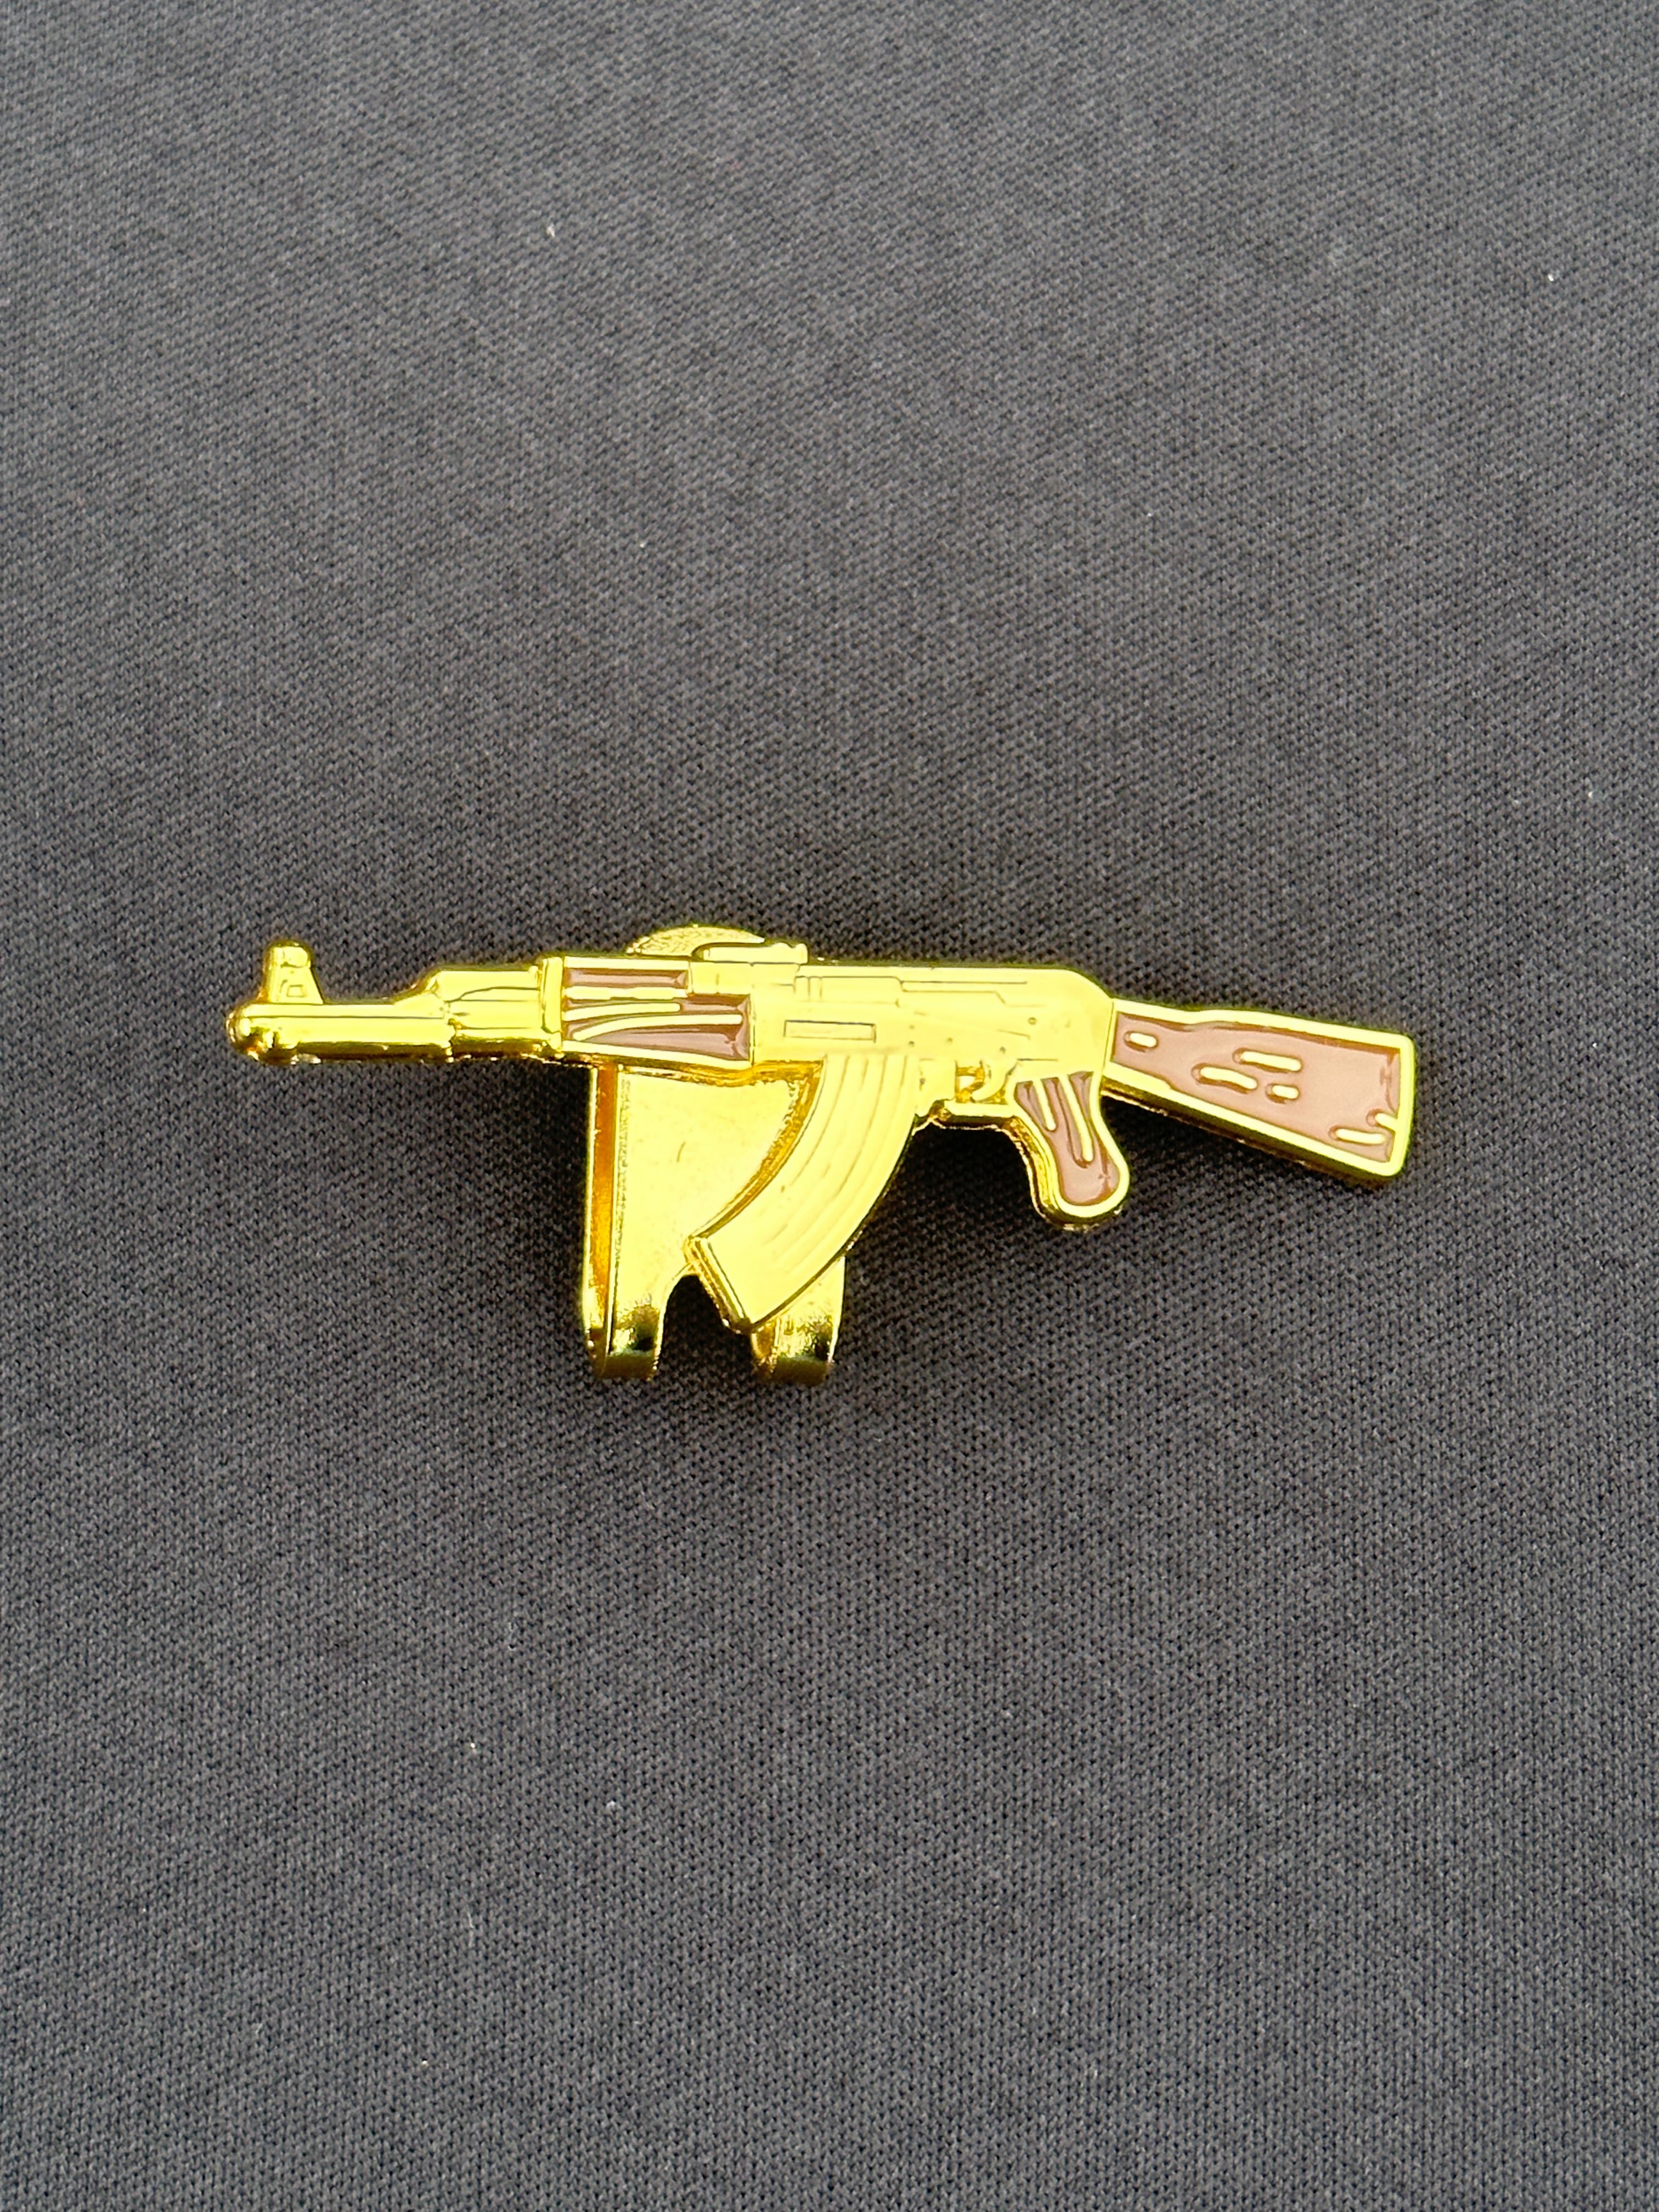 GOLD AK-47 BLIP VERY LIMITED